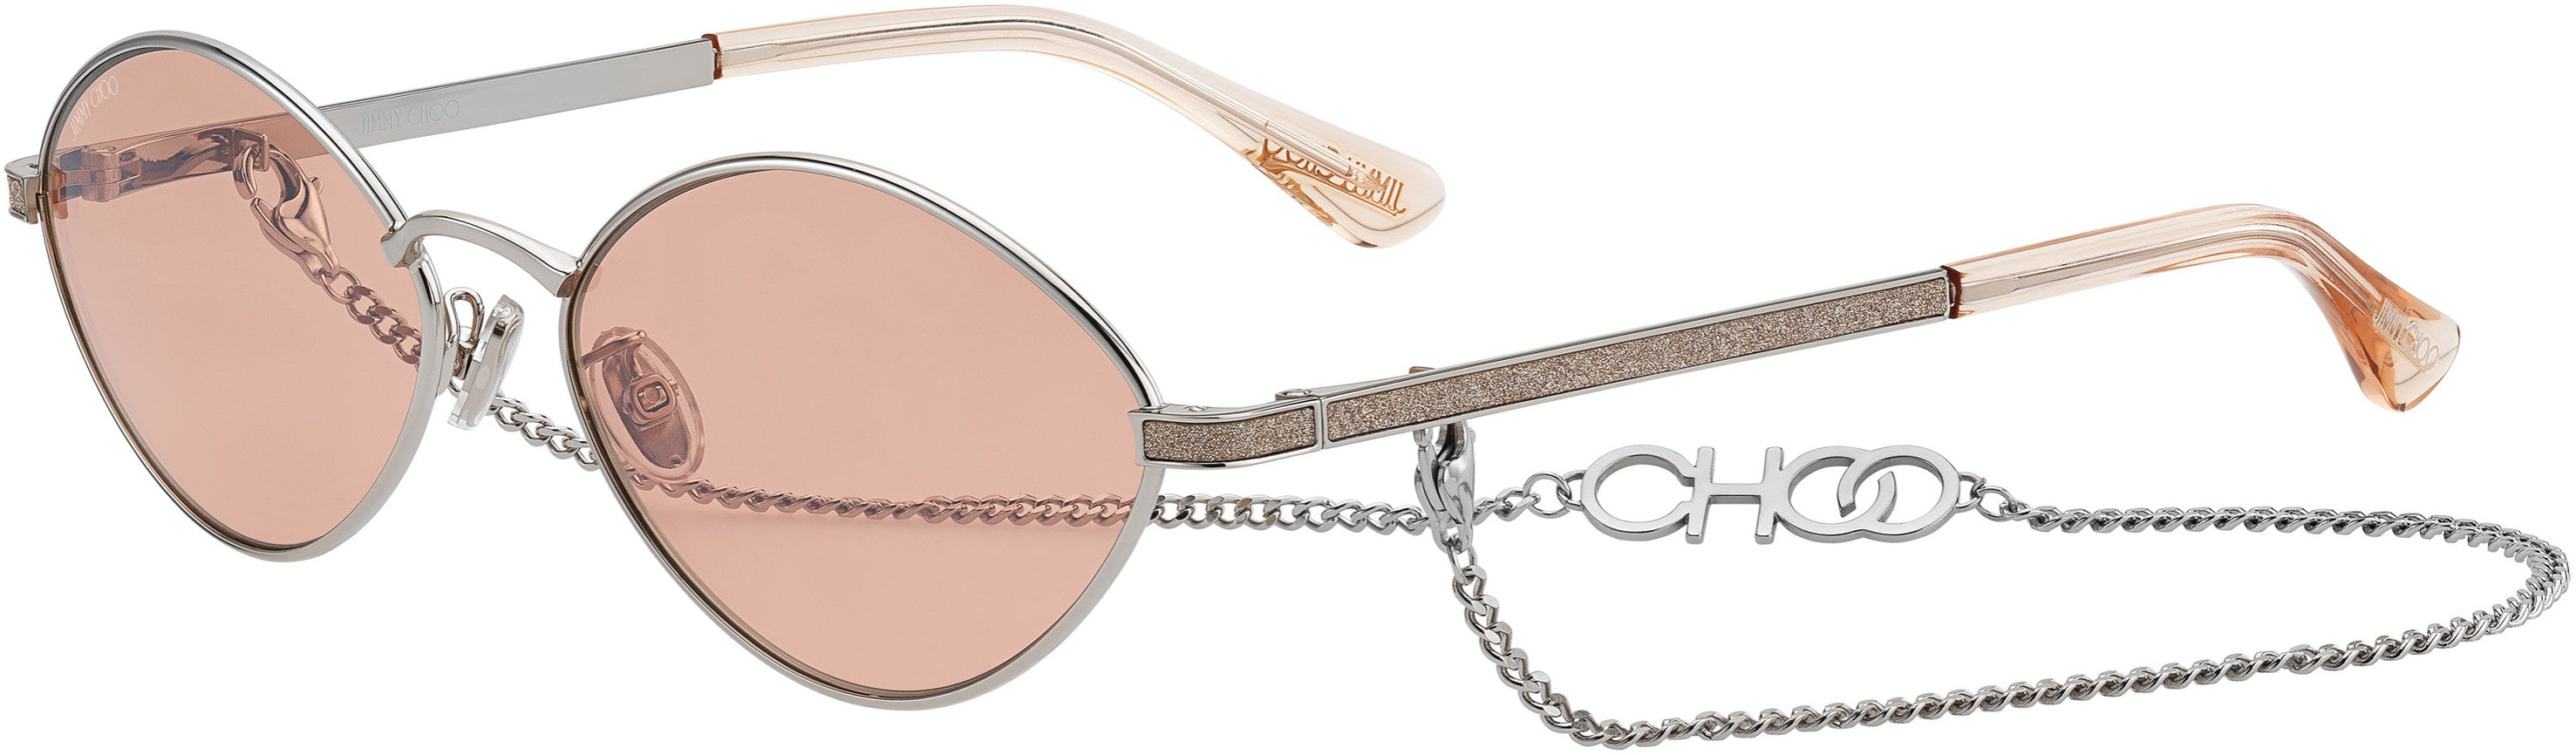 Jimmy Choo Sonny/S Special Shape Sunglasses 09F6-09F6  Peach Pd Pink (2S Pink Flash Silver)